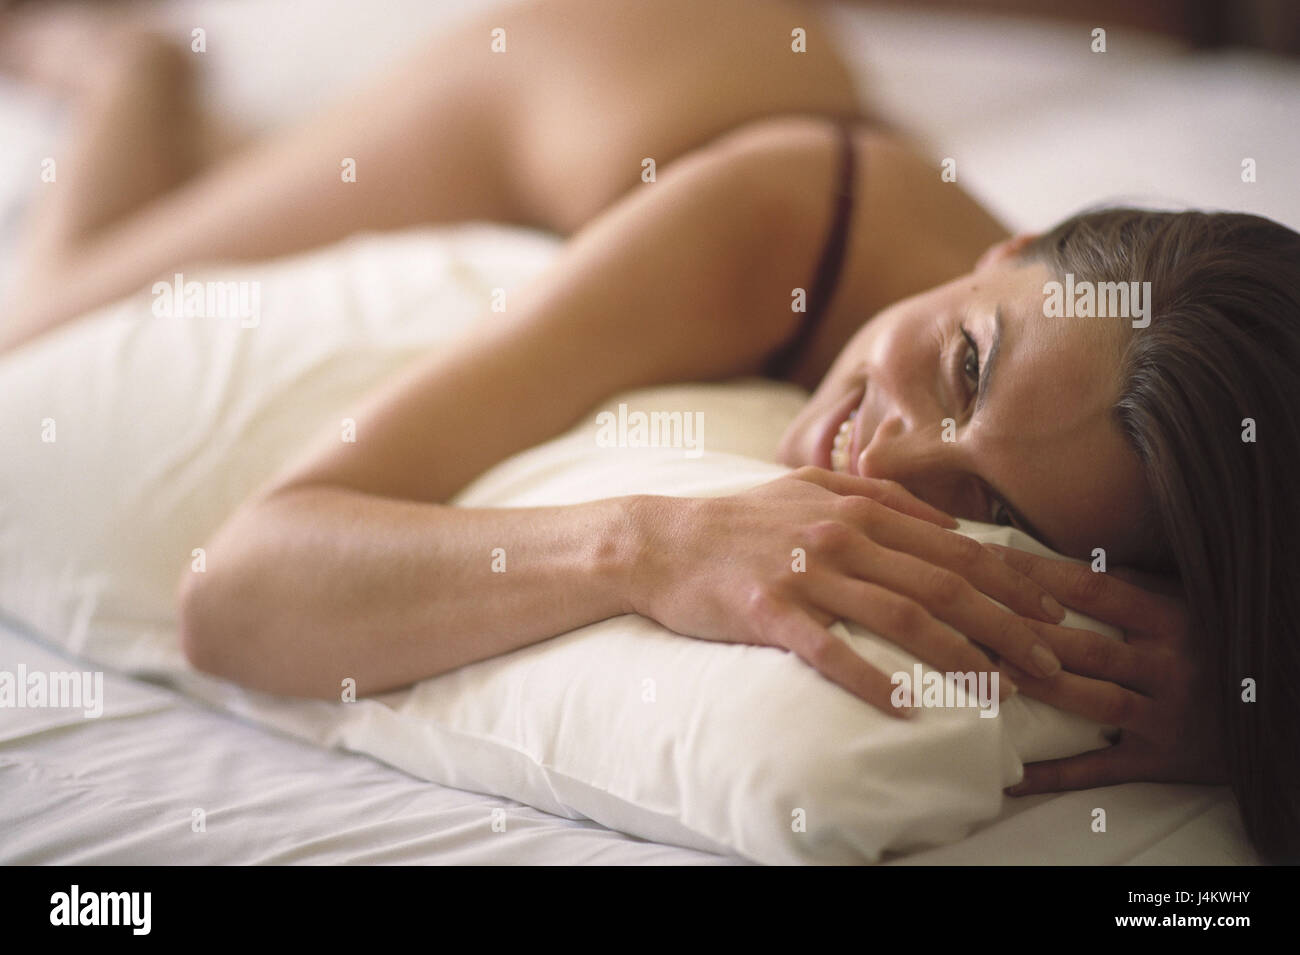 Woman, happily, bed, there lie bedrooms, single, rest, recover, are relaxing, take it easy, leisure time, week-end, enjoy, are lazy, get a good night's sleep, lifestyle Stock Photo